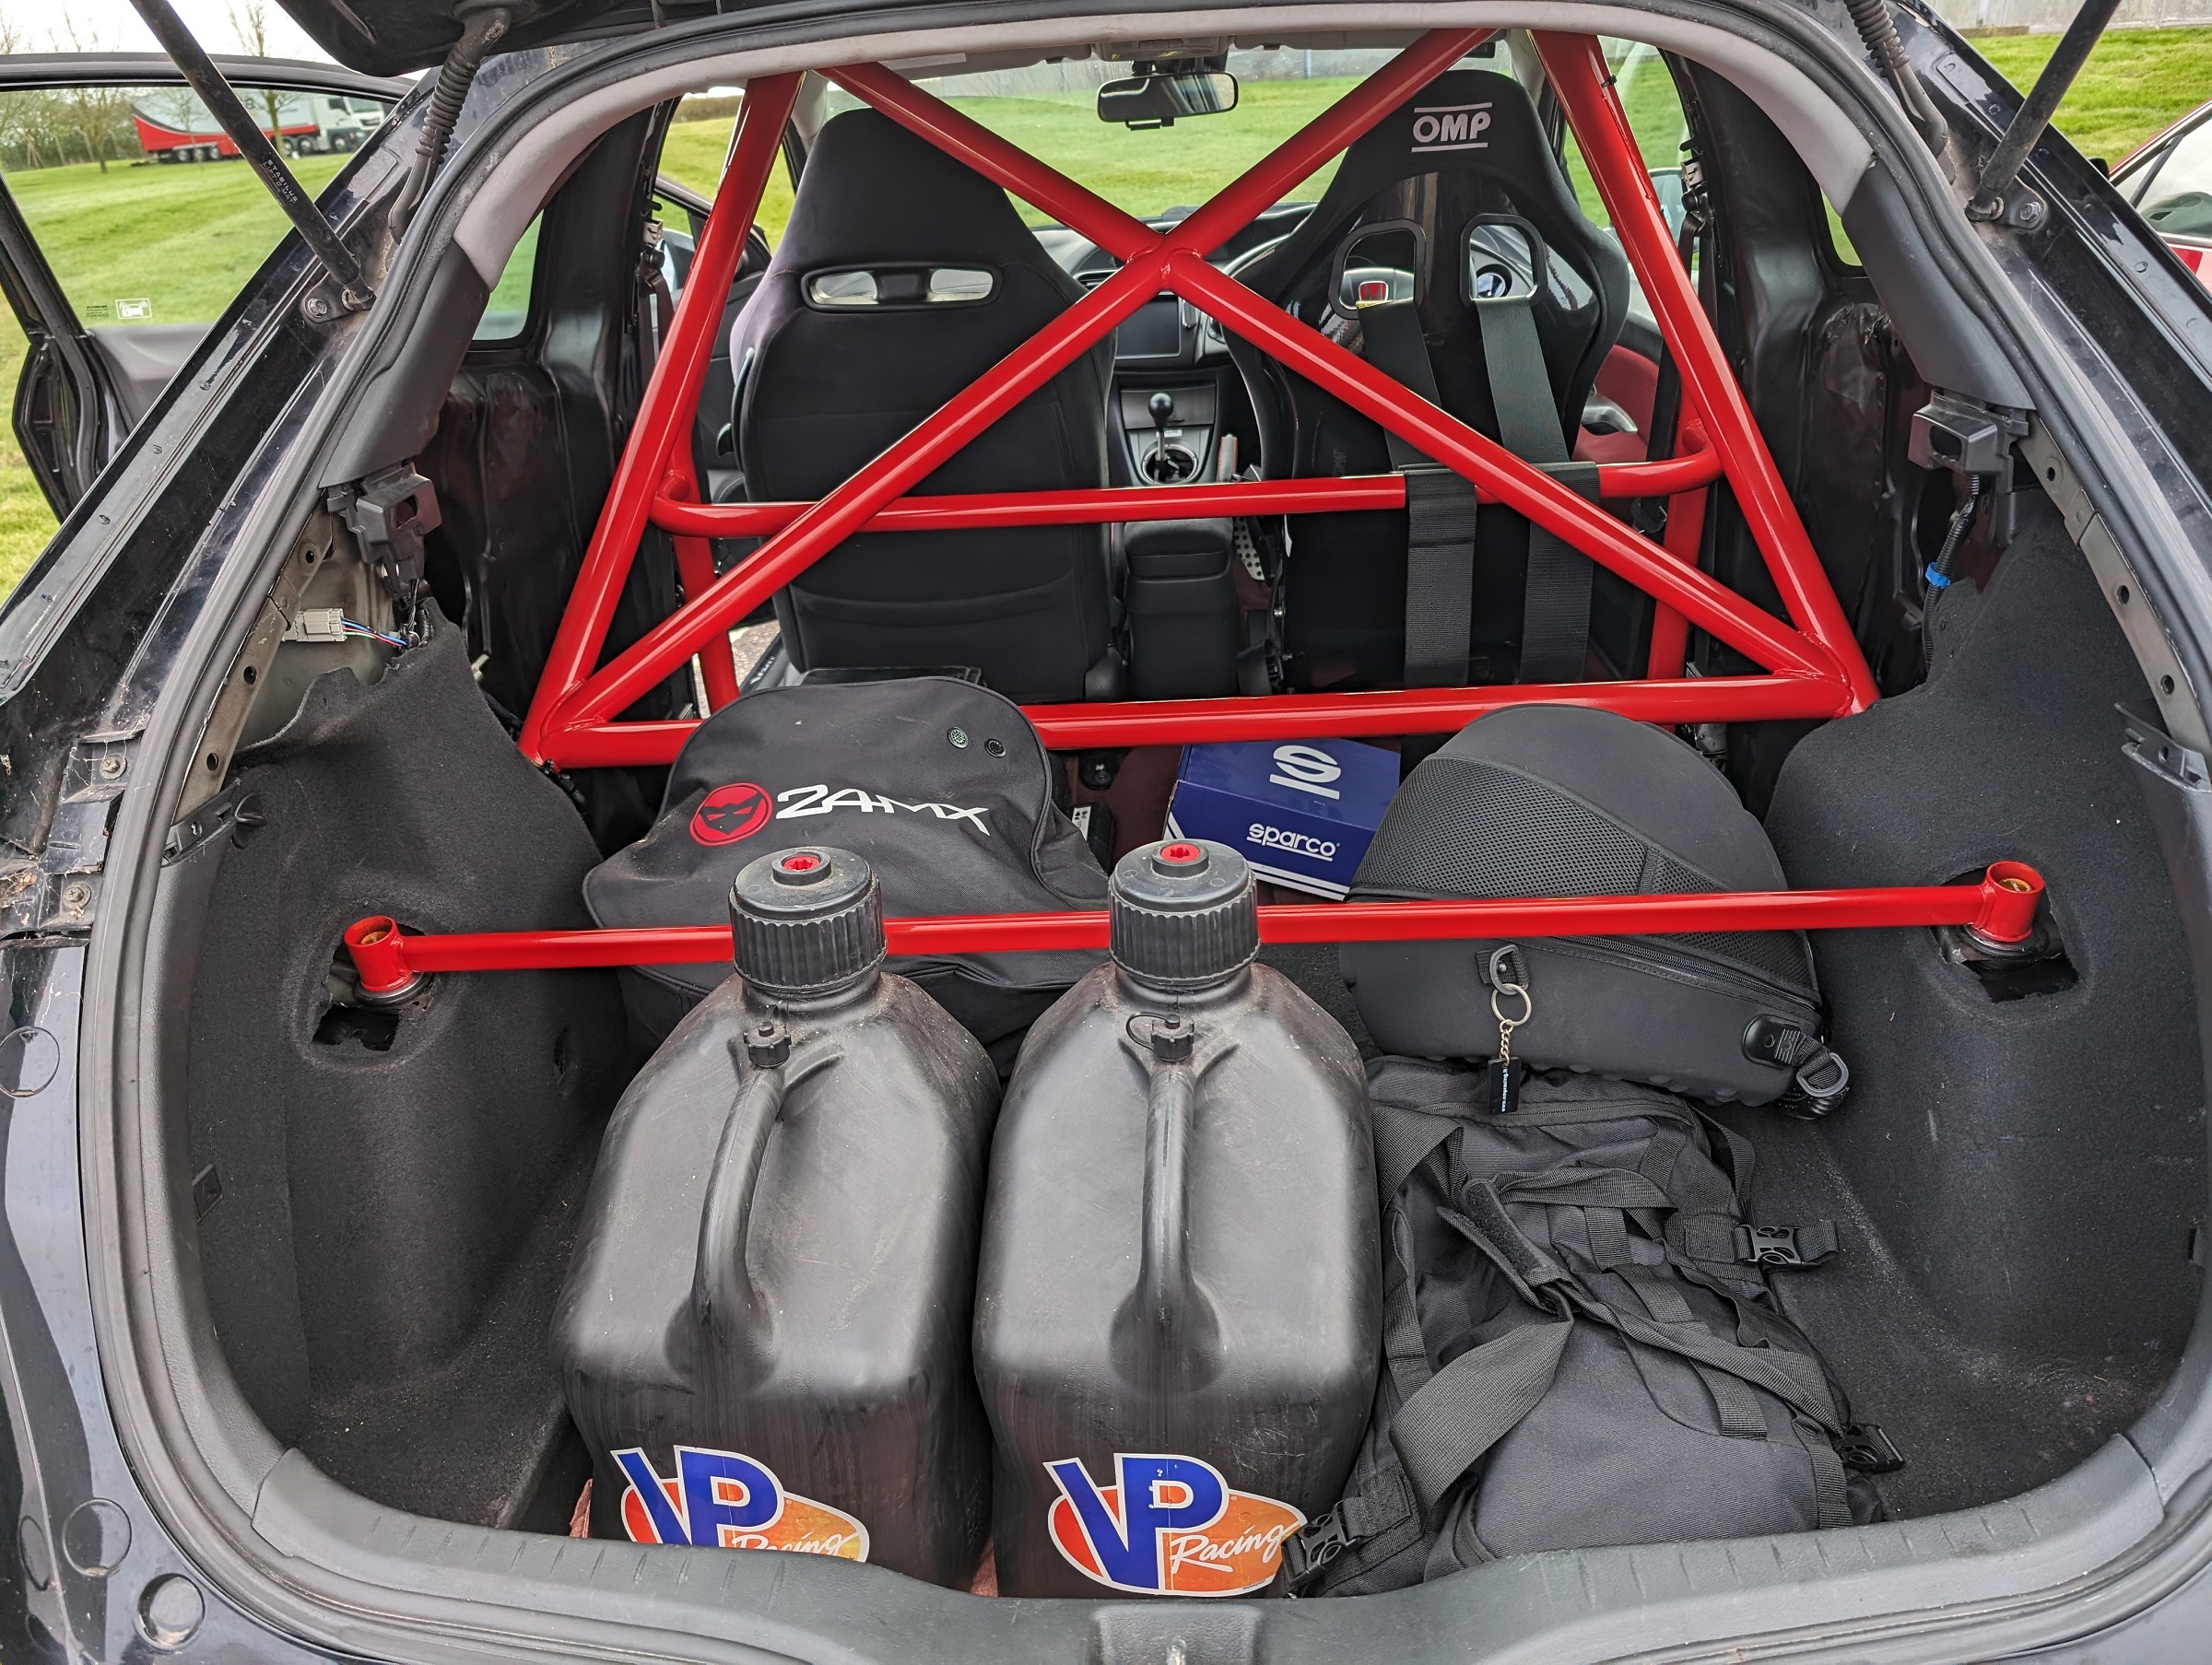 Pistonheads - The image depicts the interior of a car, viewed from the perspective of someone standing outside. It appears to be a rally car or race car, as evidenced by the roll cage and harnesses in the front seat. There is a red and white car chassis visible, with various equipment parts such as a jack and tools scattered around. On the backseat, there's a set of suitcases and other travel essentials, suggesting that the car might be used for competition or traveling purposes. The image has a watermark in the bottom right corner, indicating it may have been edited or manipulated.